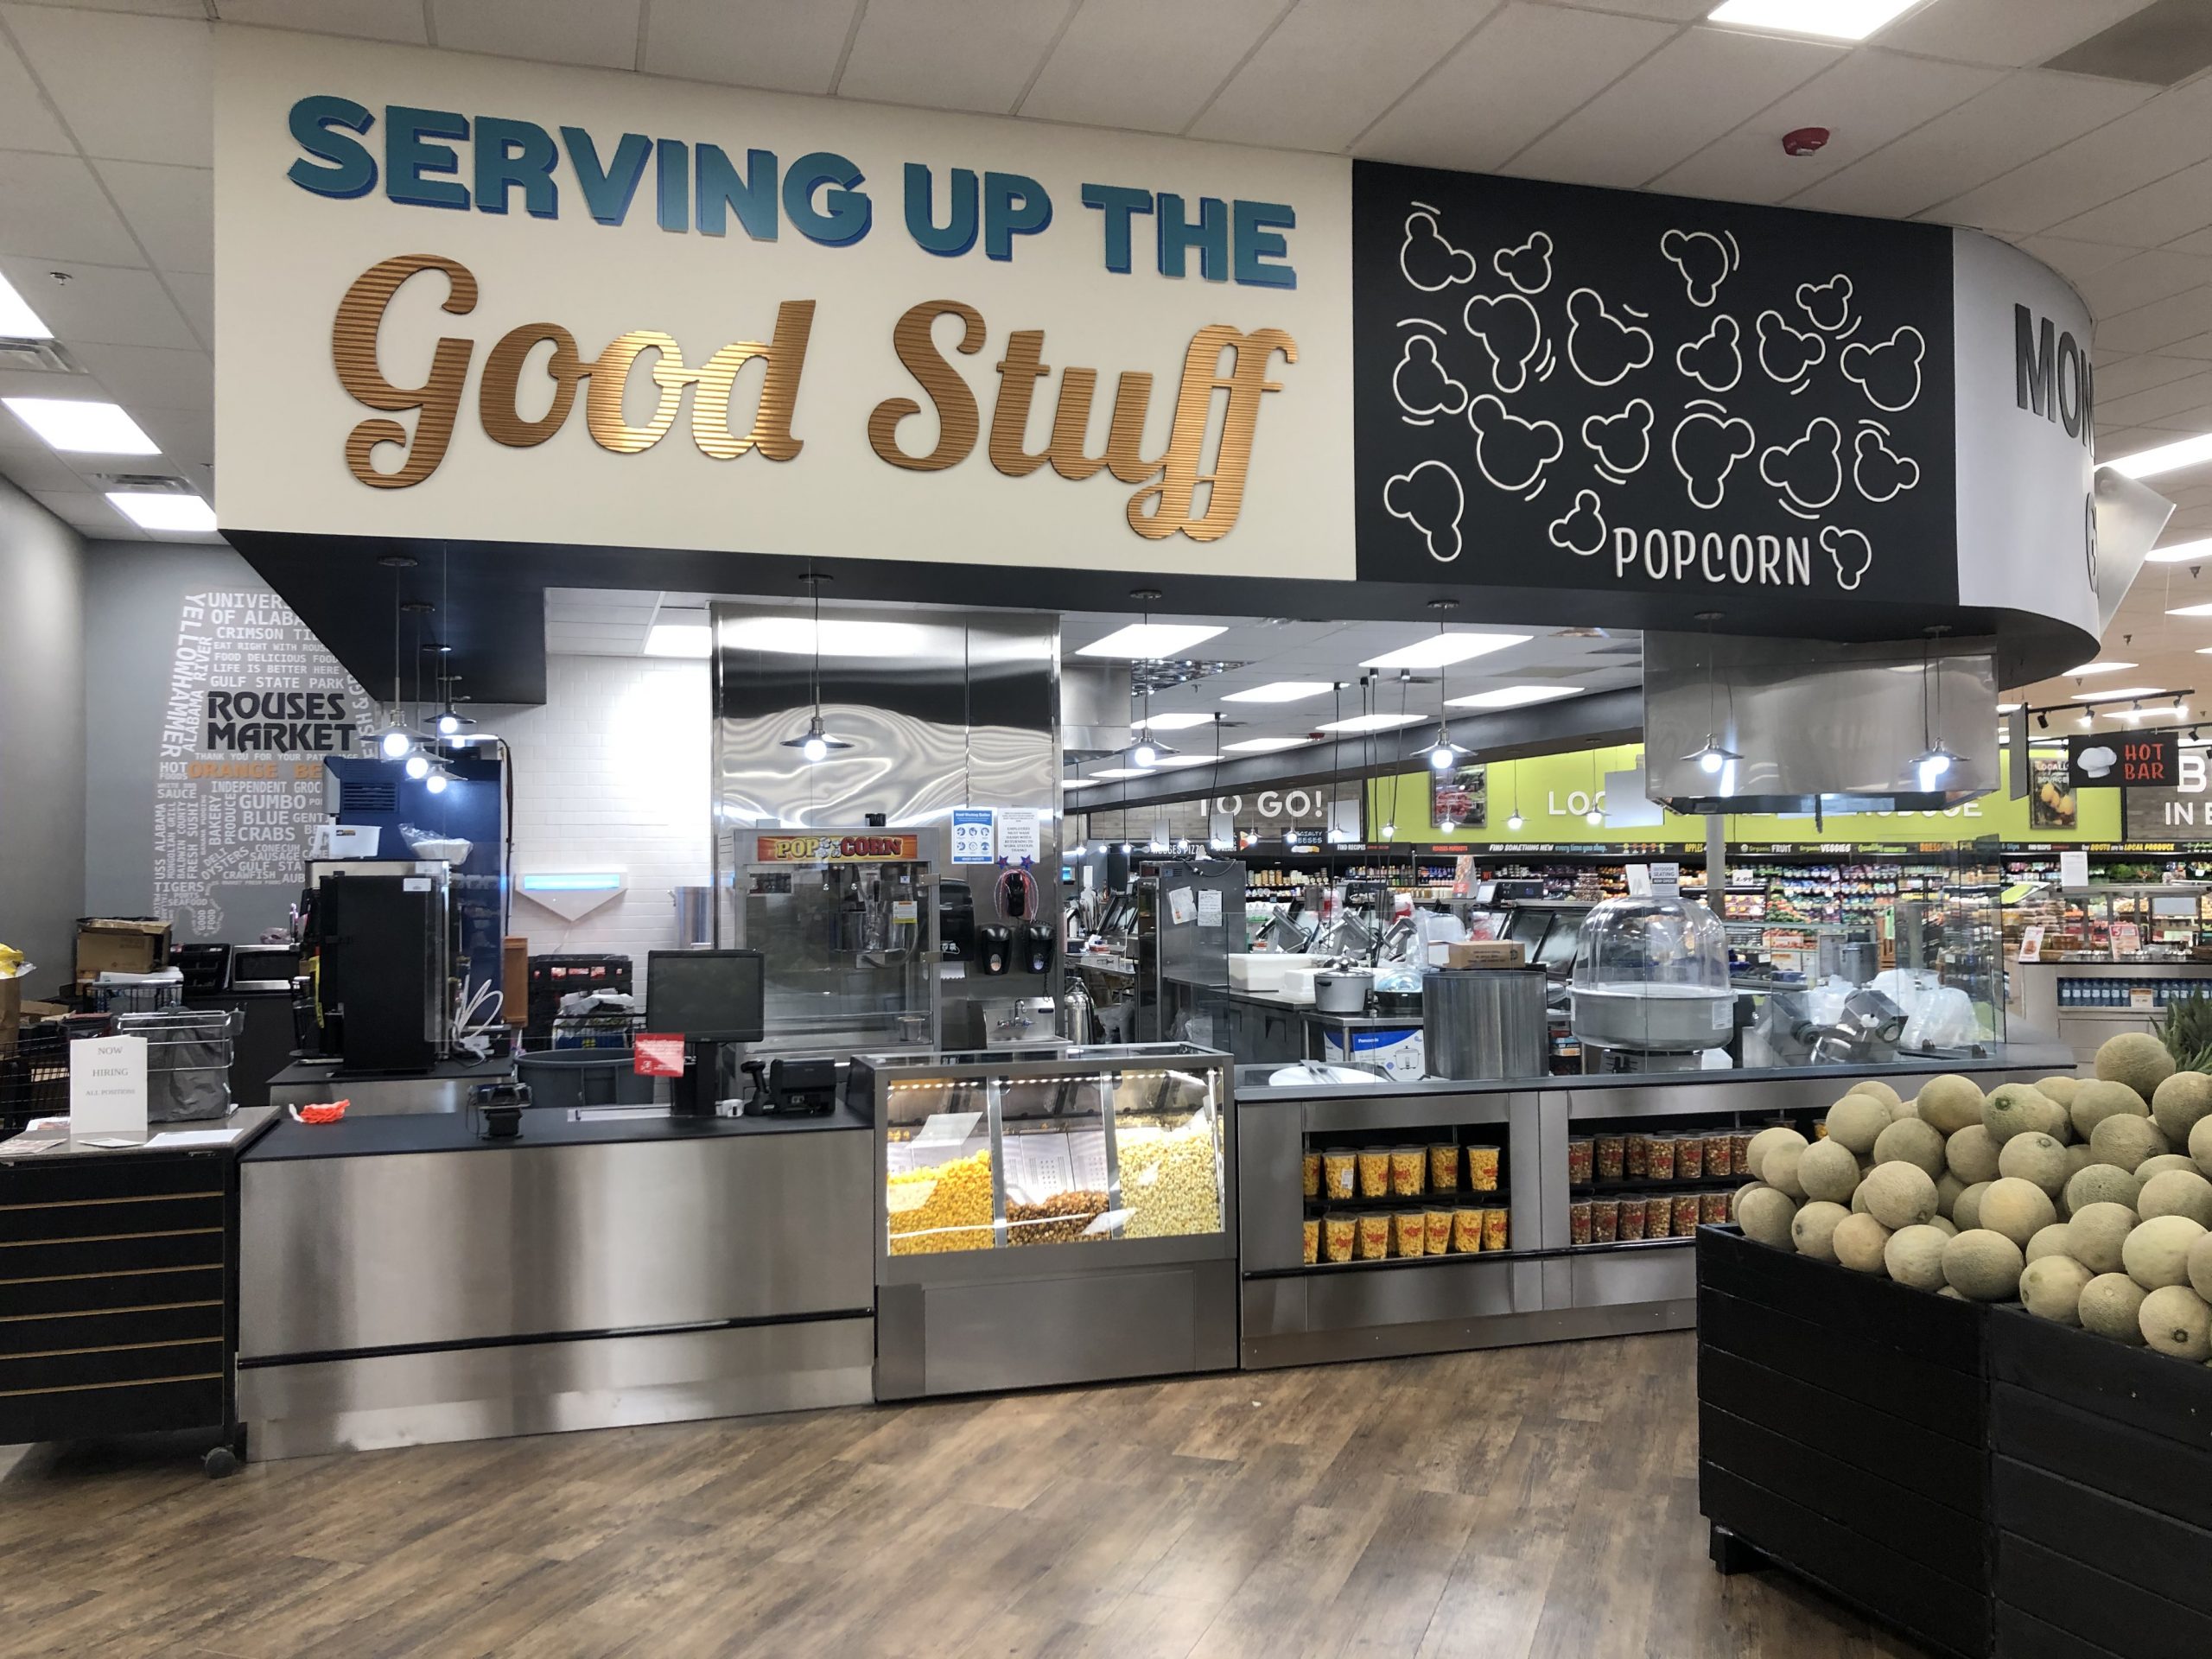 The StoreMasters design team created custom graphics and text throughout each store for the best customer experience